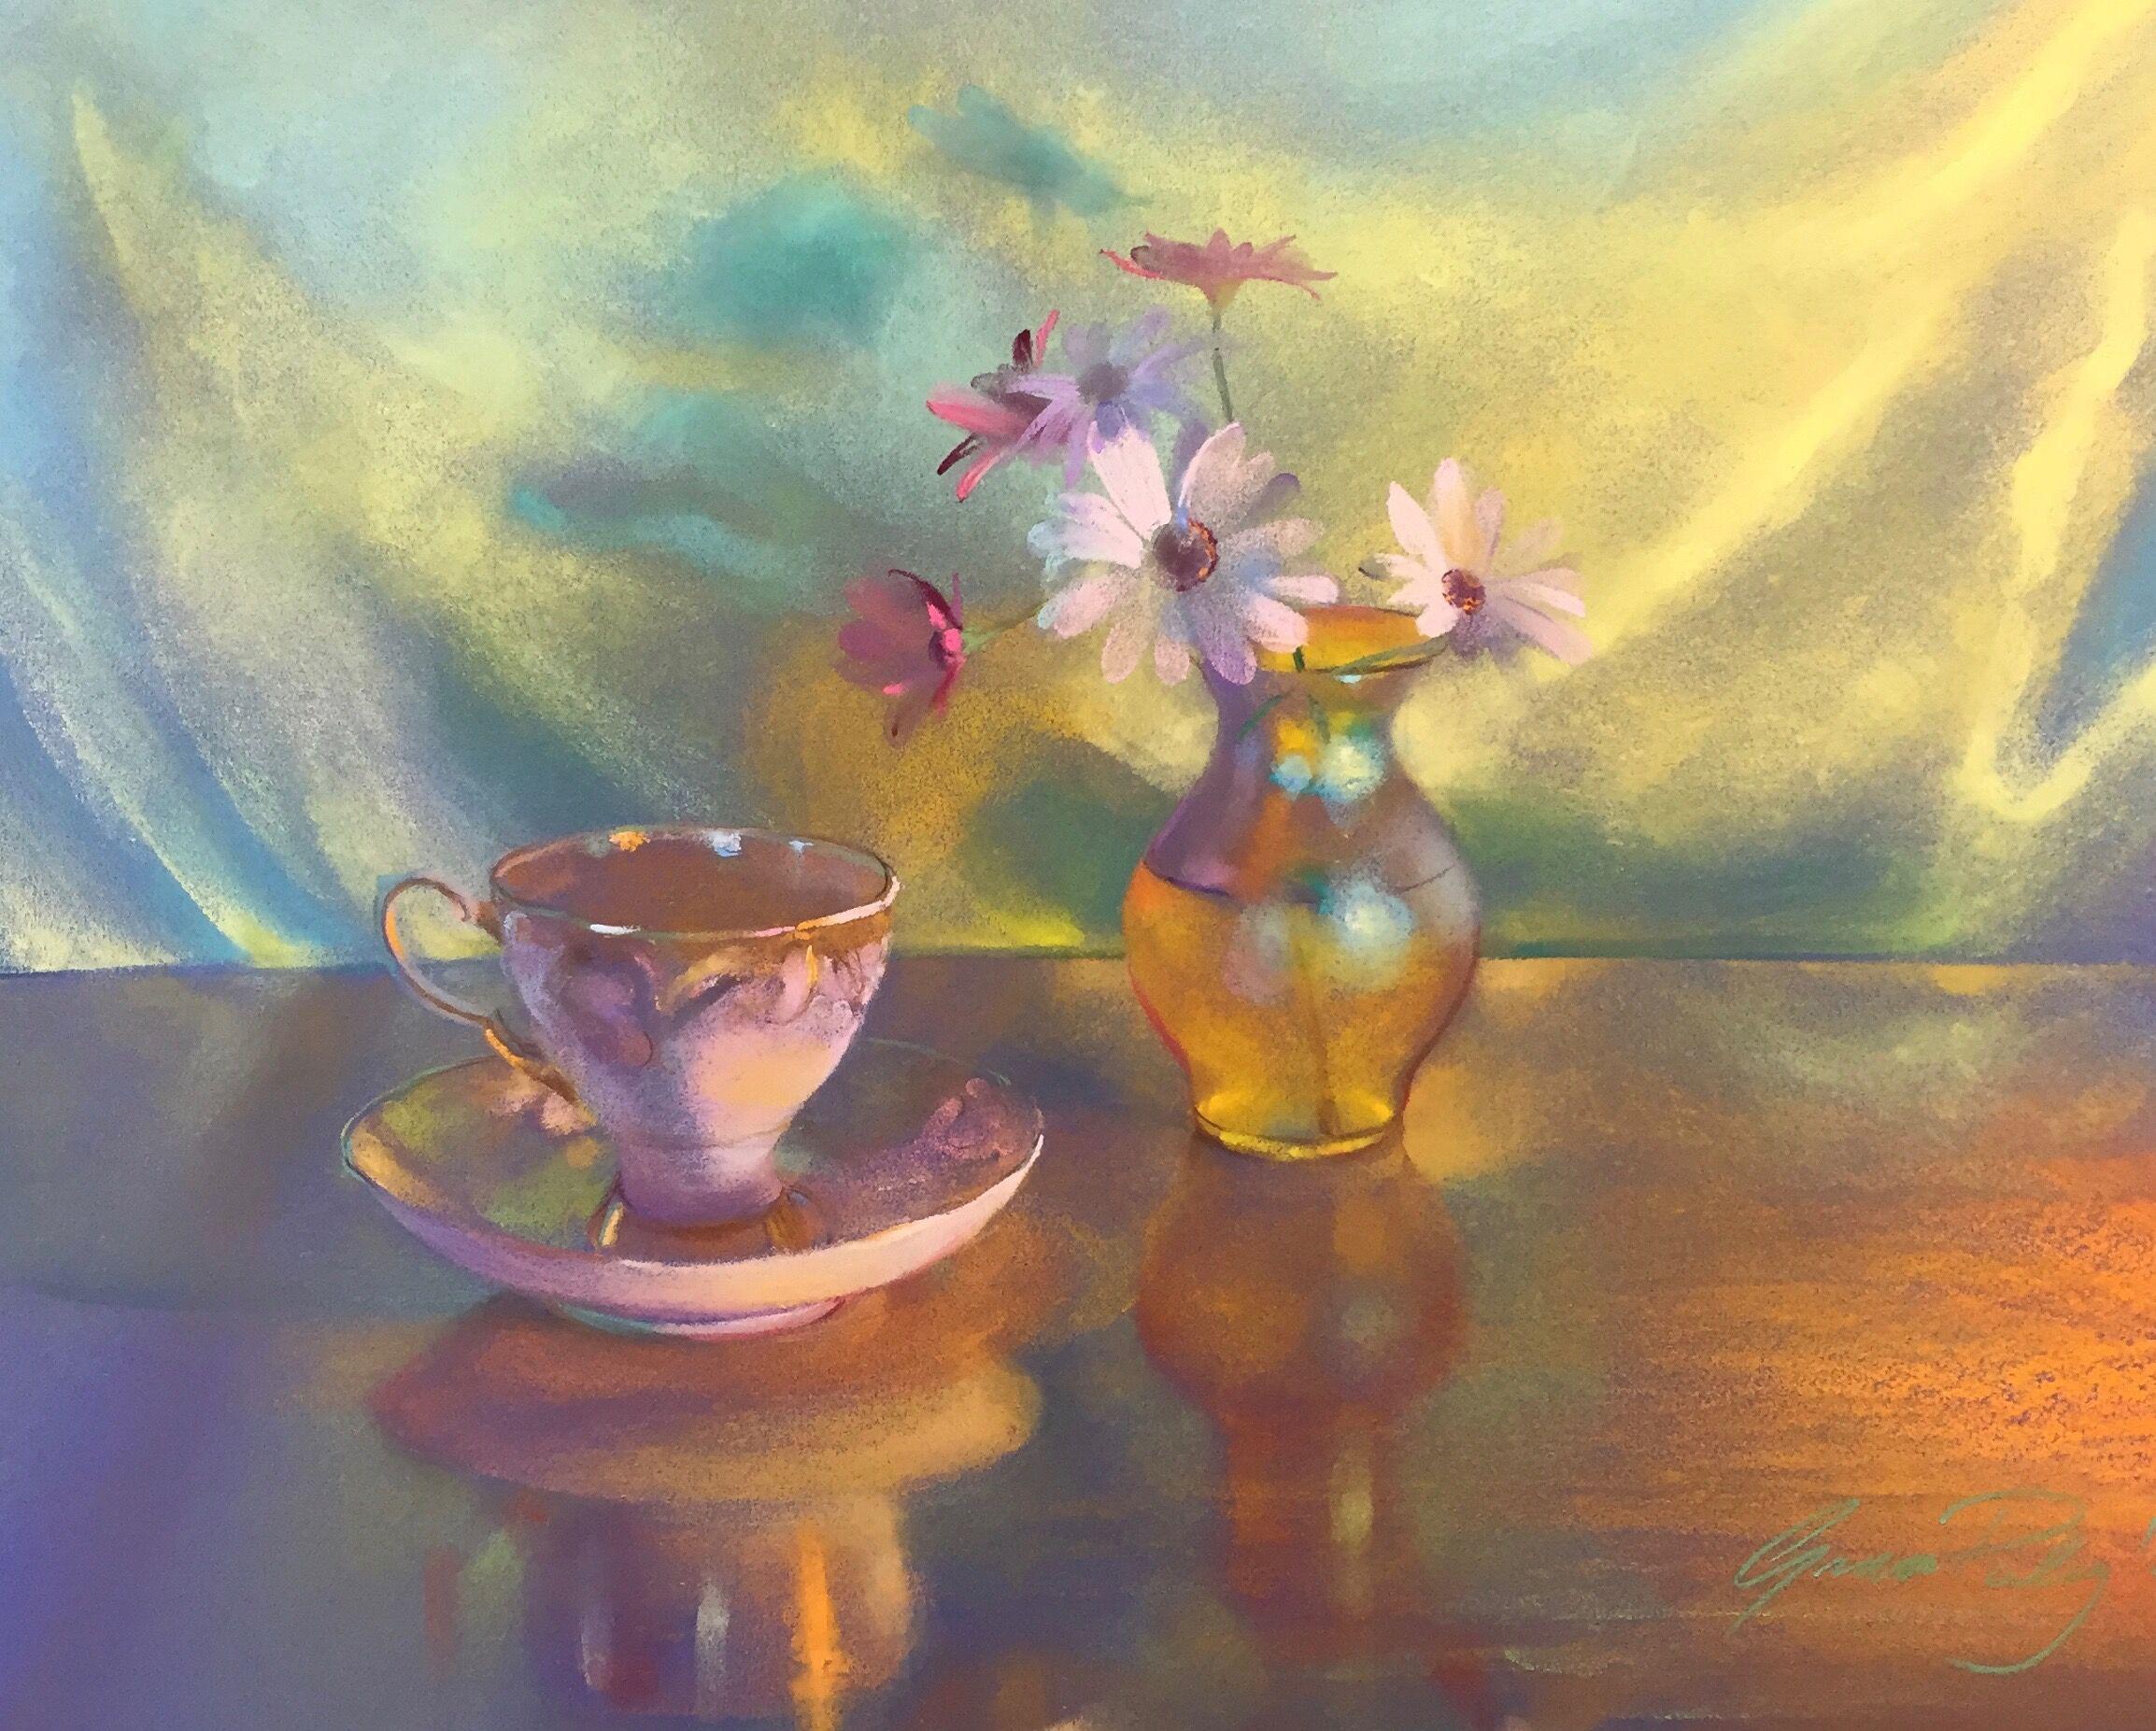 Grace Paleg Pastel Painting Daisies with mums teacups